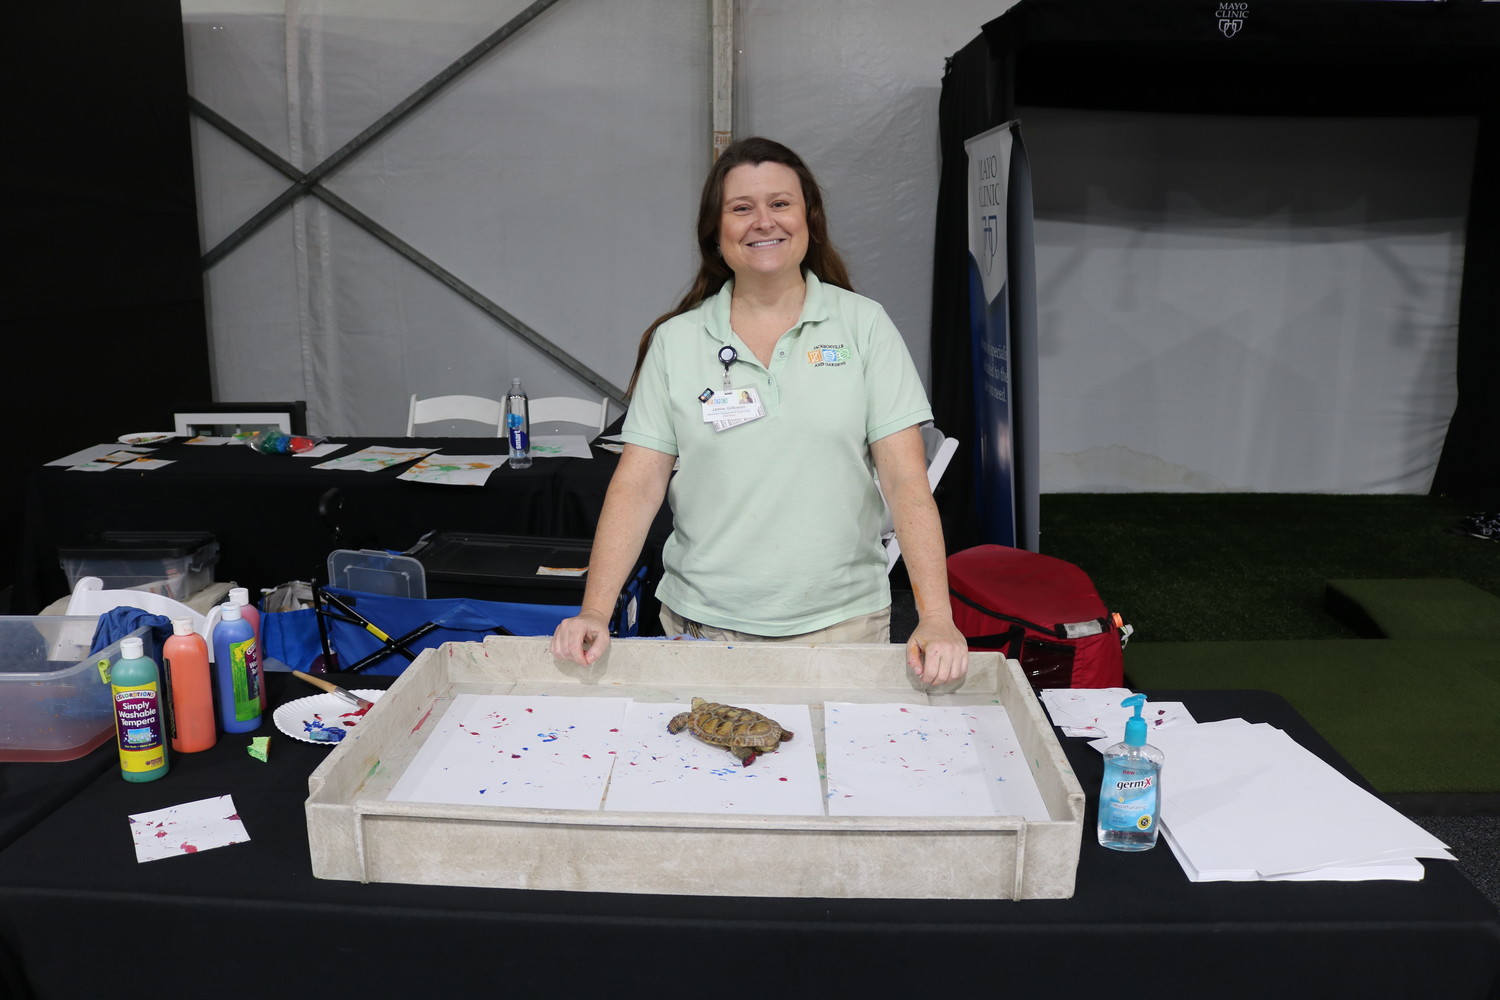 Jamie Gilkison, an education engagement supervisor with the Jacksonville Zoo, poses for a photo behind the Jacksonville Zoo's booth.